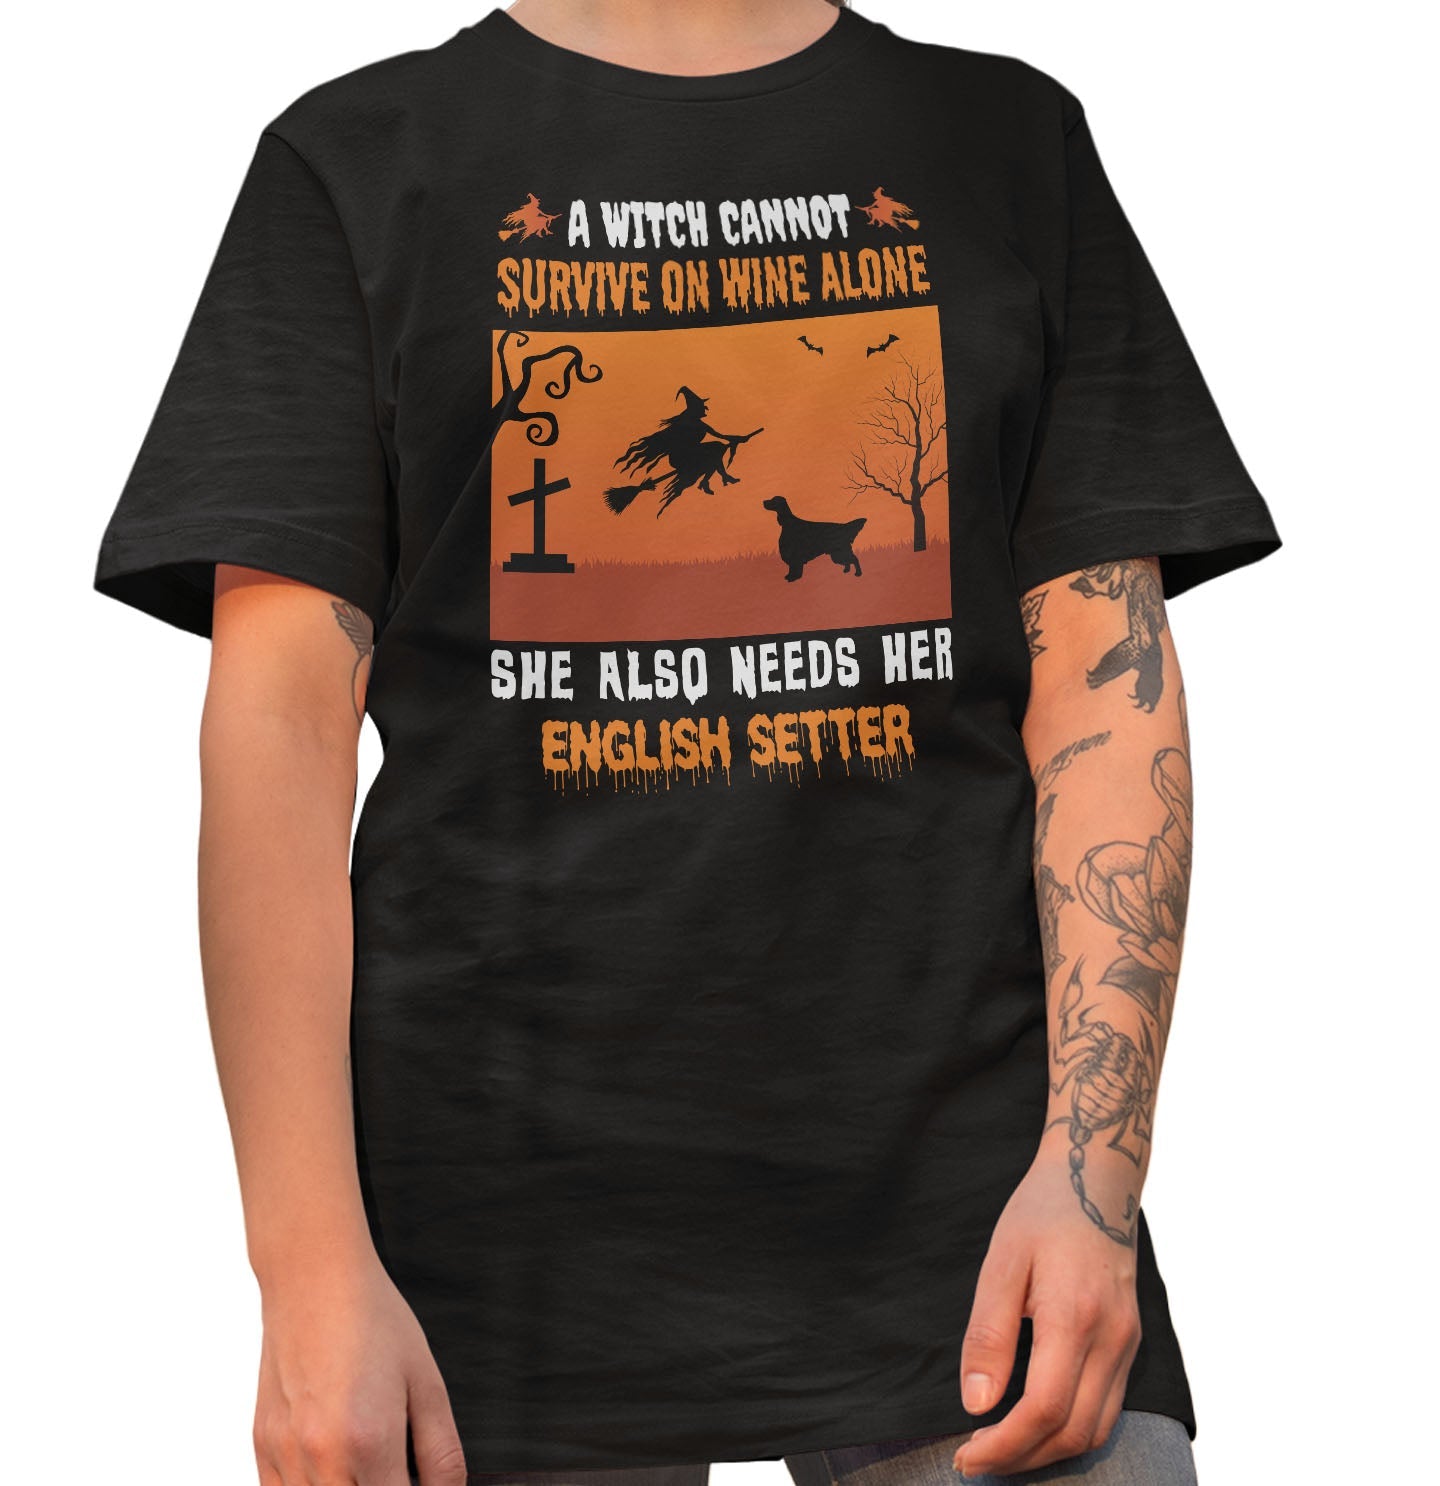 A Witch Needs Her English Setter - Adult Unisex T-Shirt